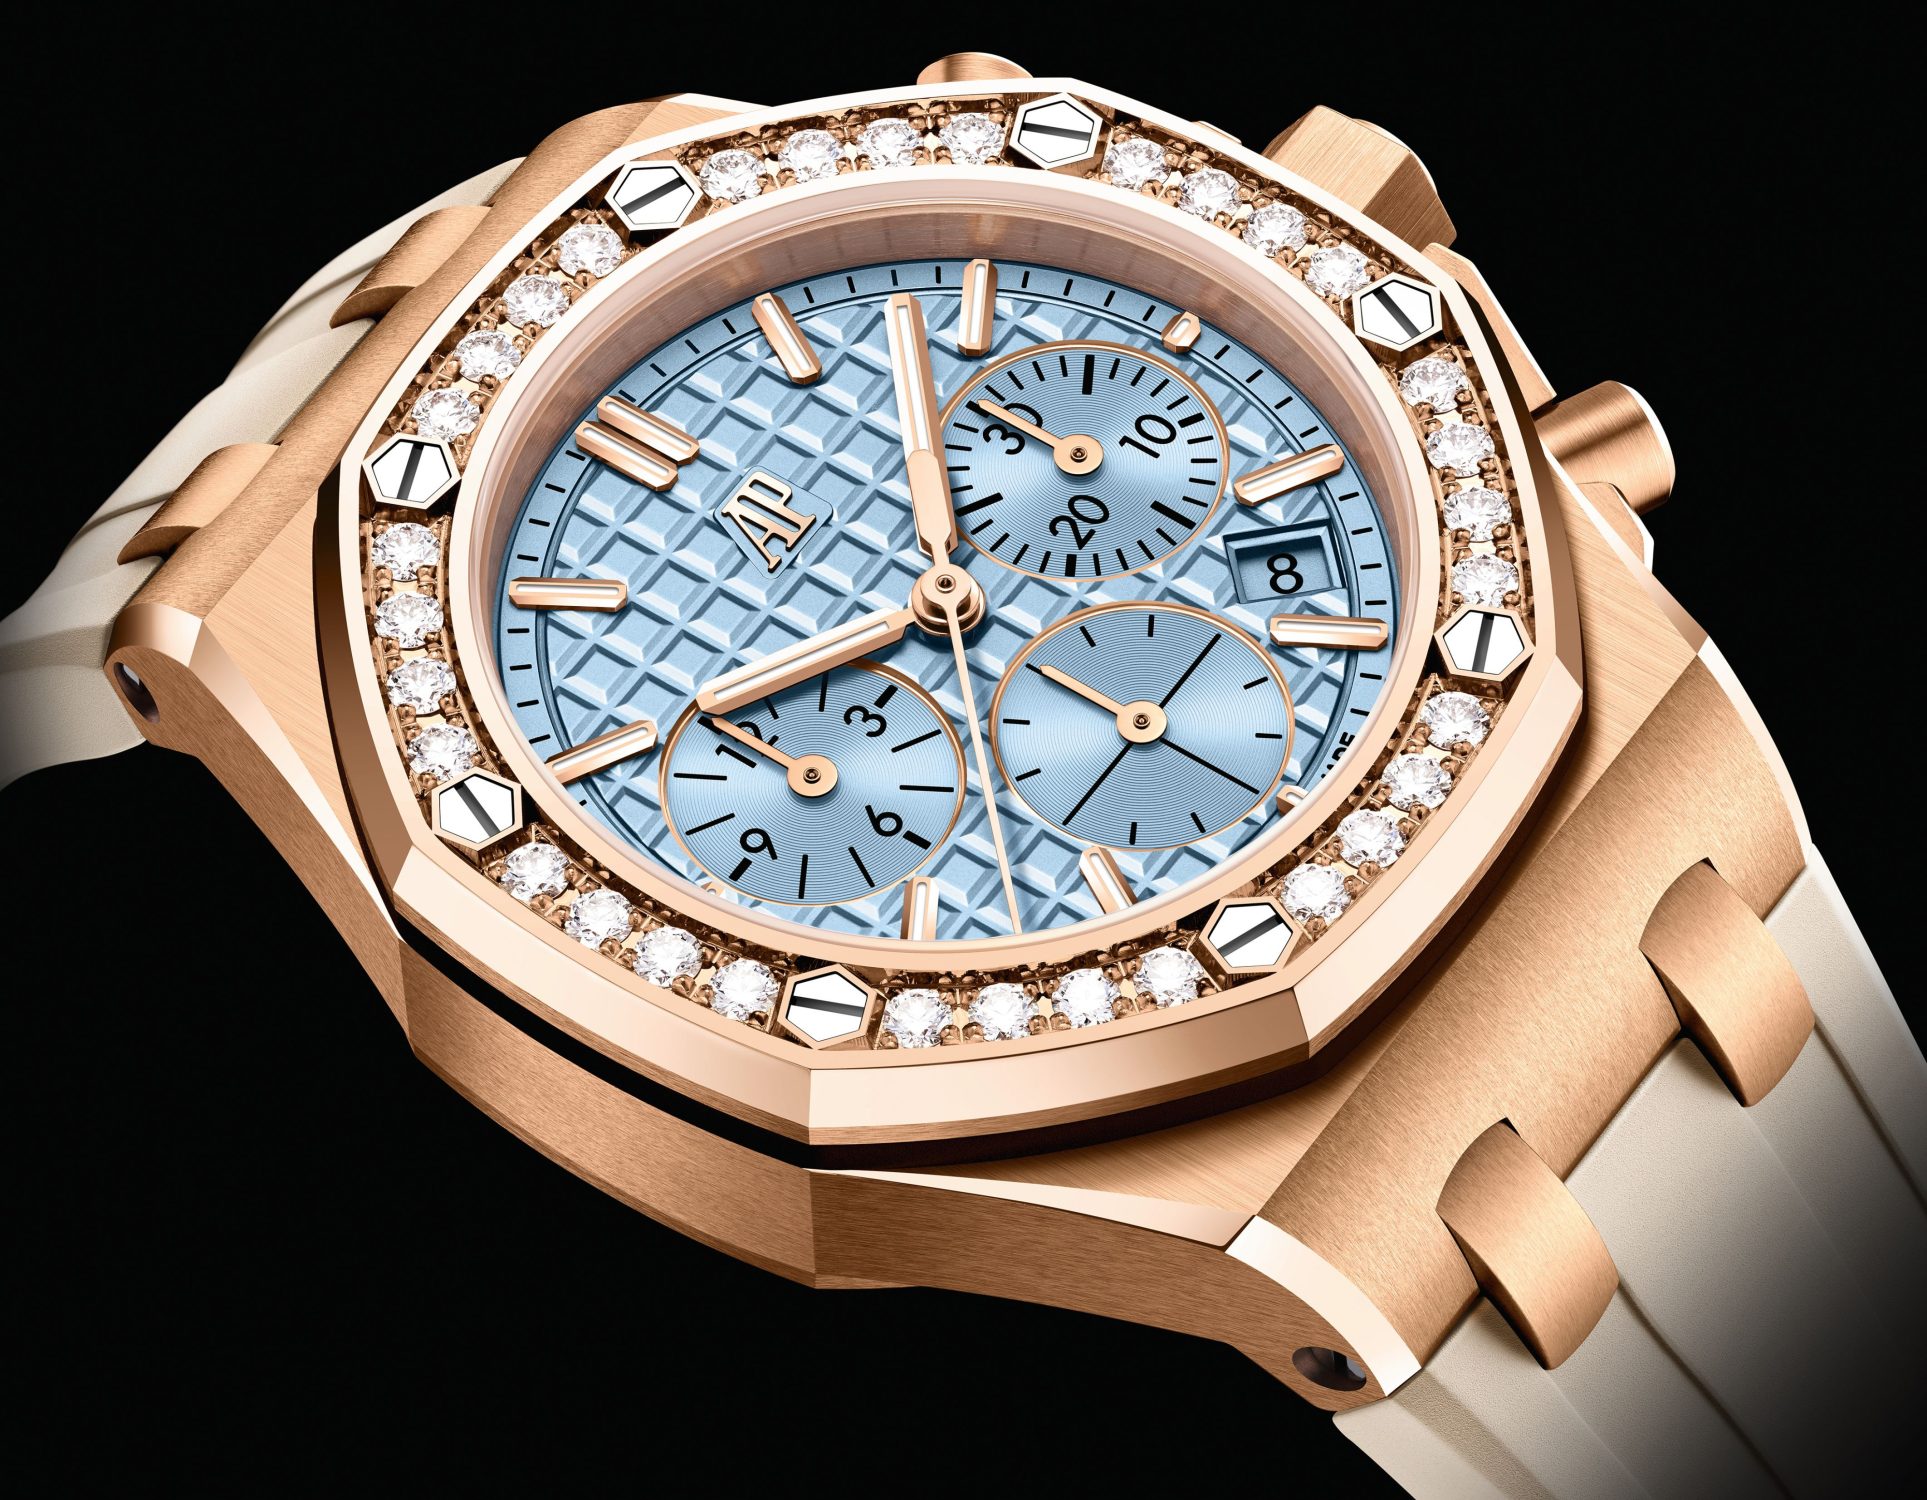 Keep Time with a Dazzling Special Collaboration Watch Celebrating